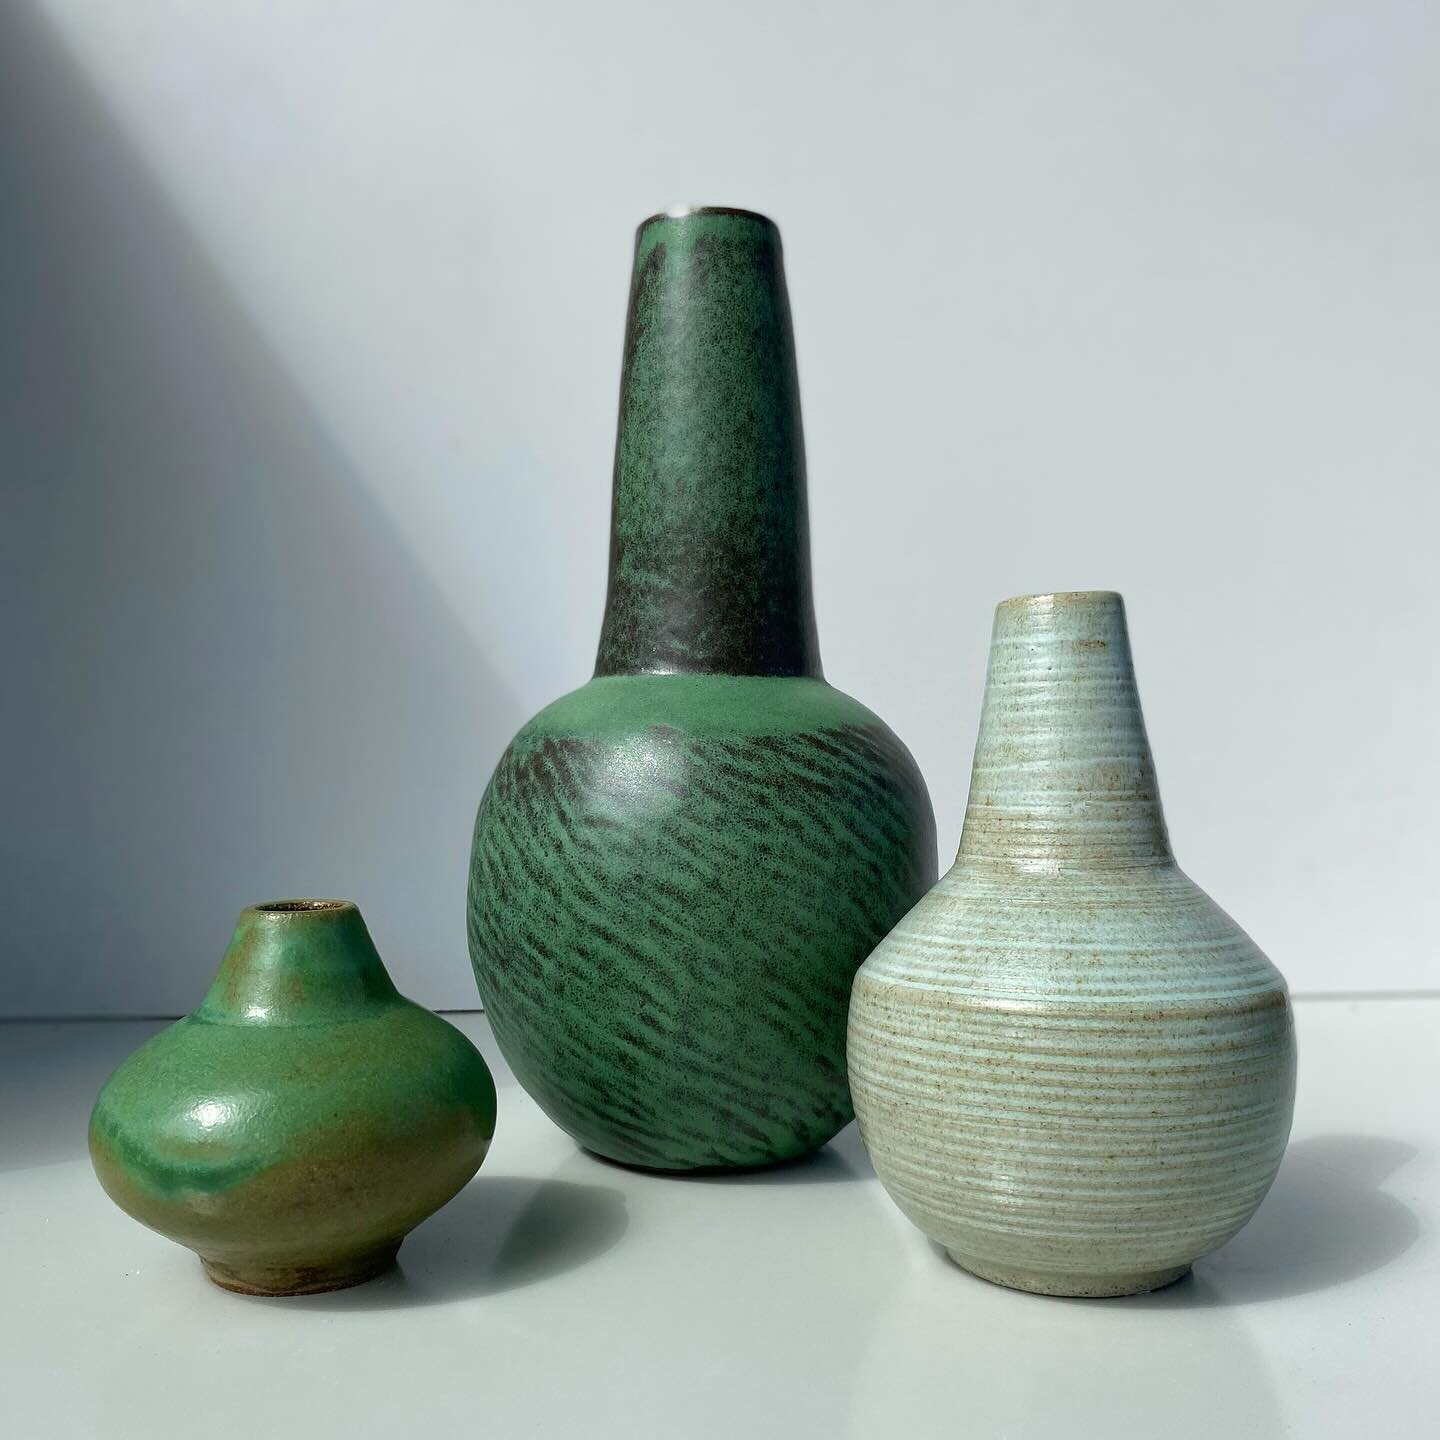 I have a collection of vessels now available @michaelreidclay - Forest Bathing is a grouping of functional ceramics that explores the light and textures found in the verdant surroundings of my home on Dharawal Country #ceramiccollection #greenceramic